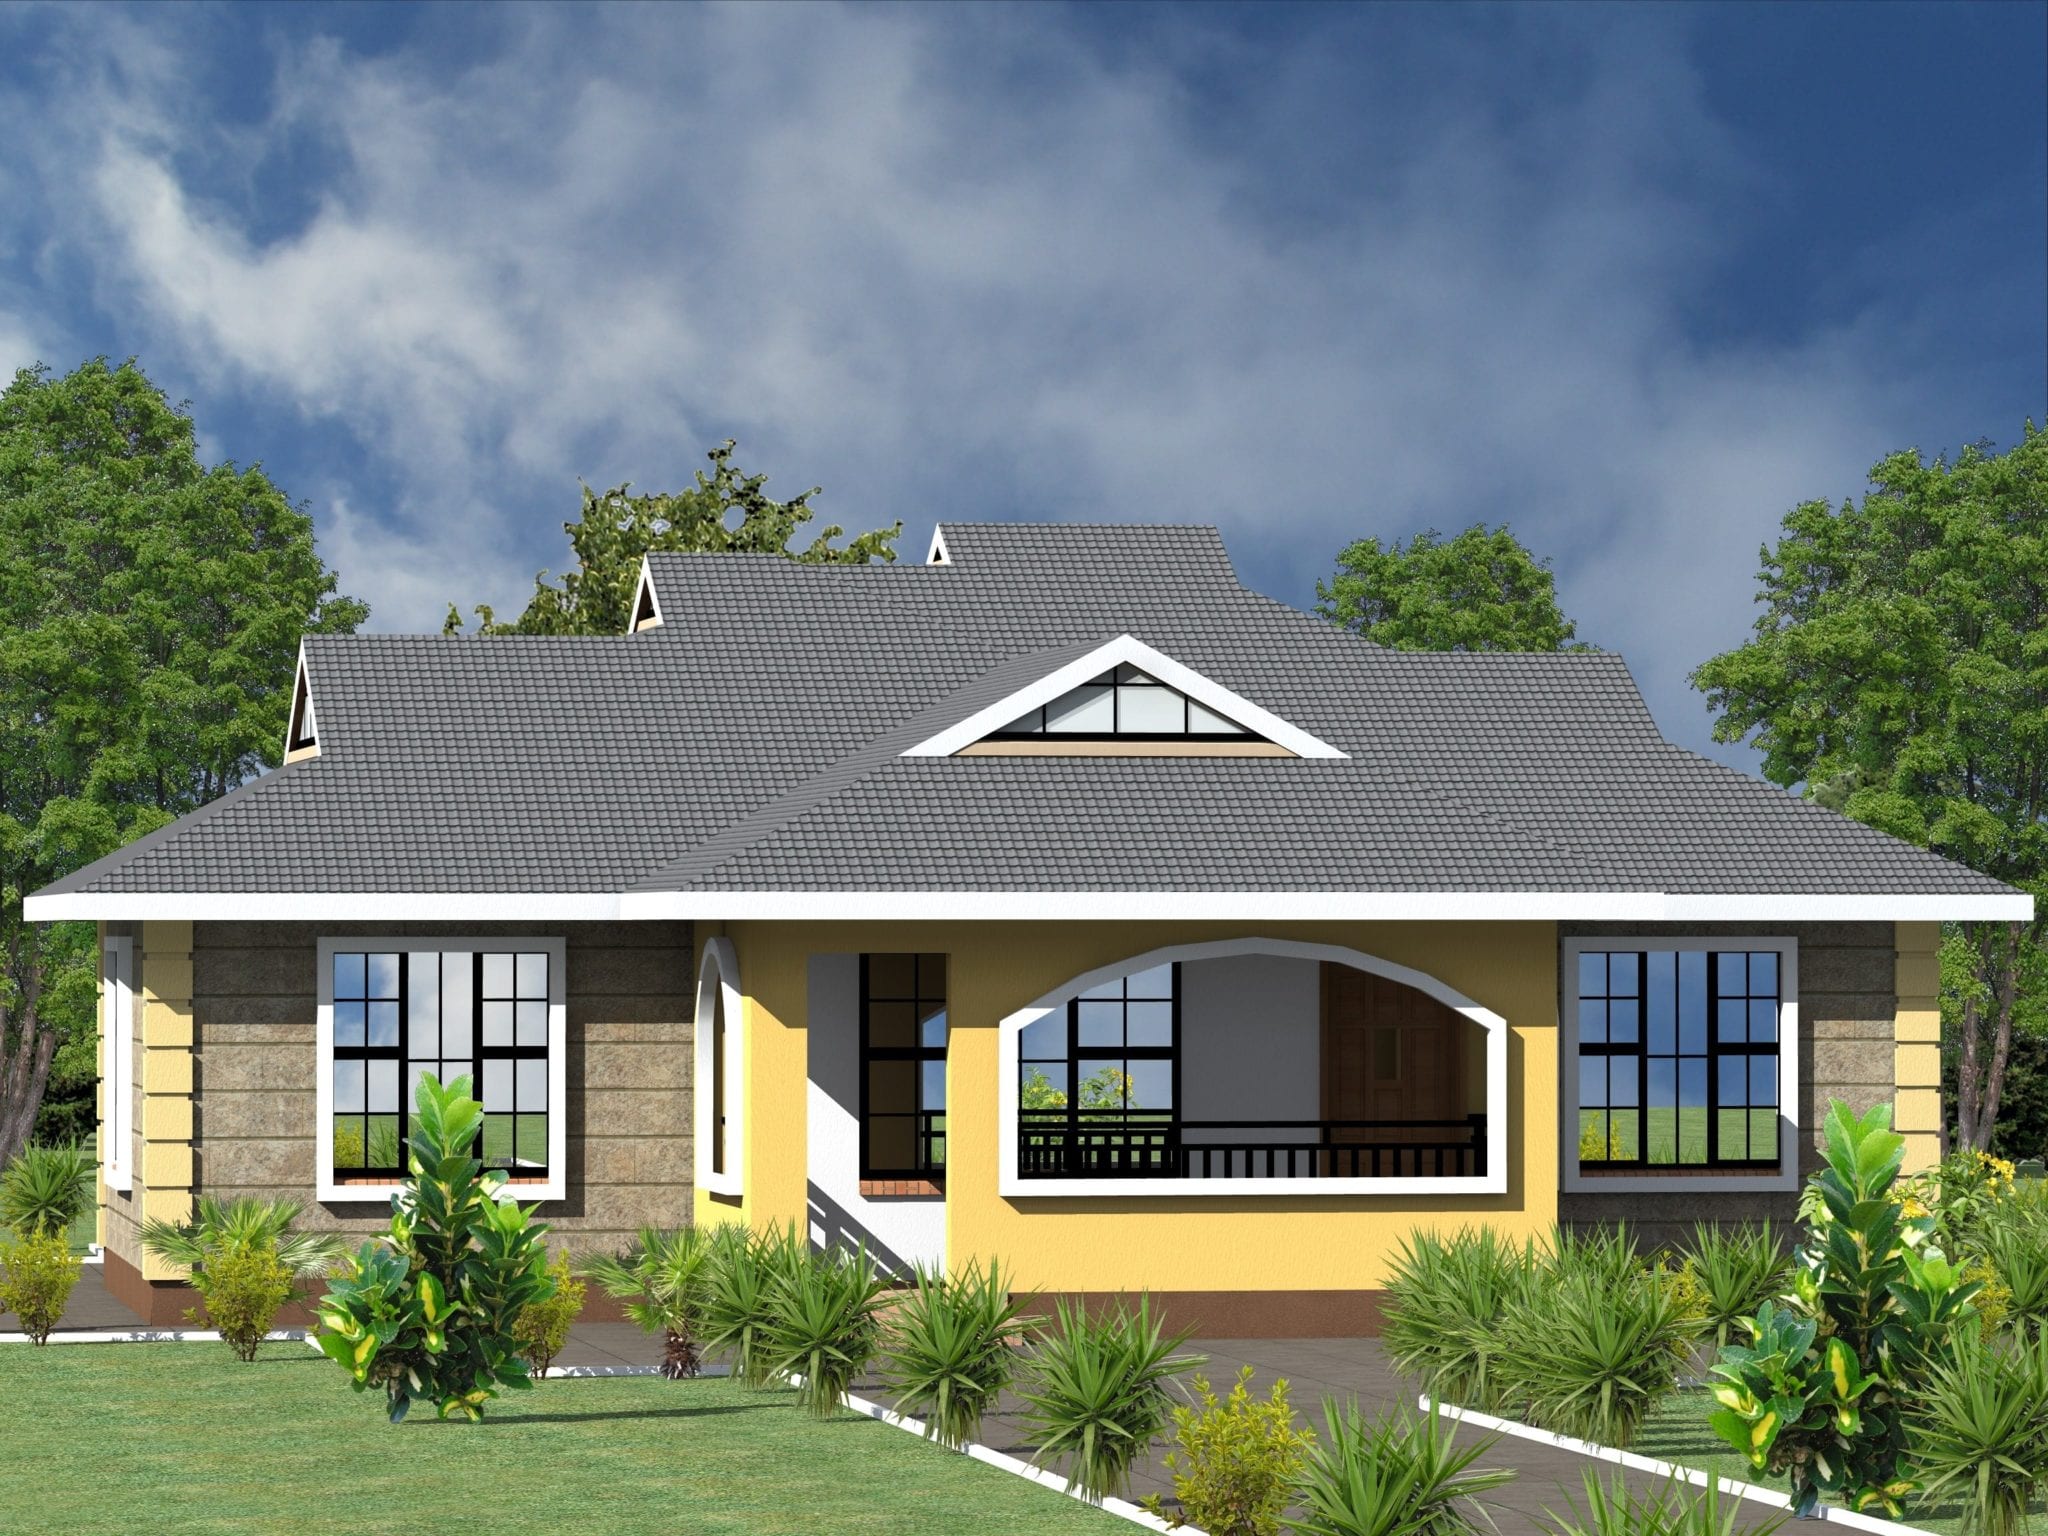 house plans and designs